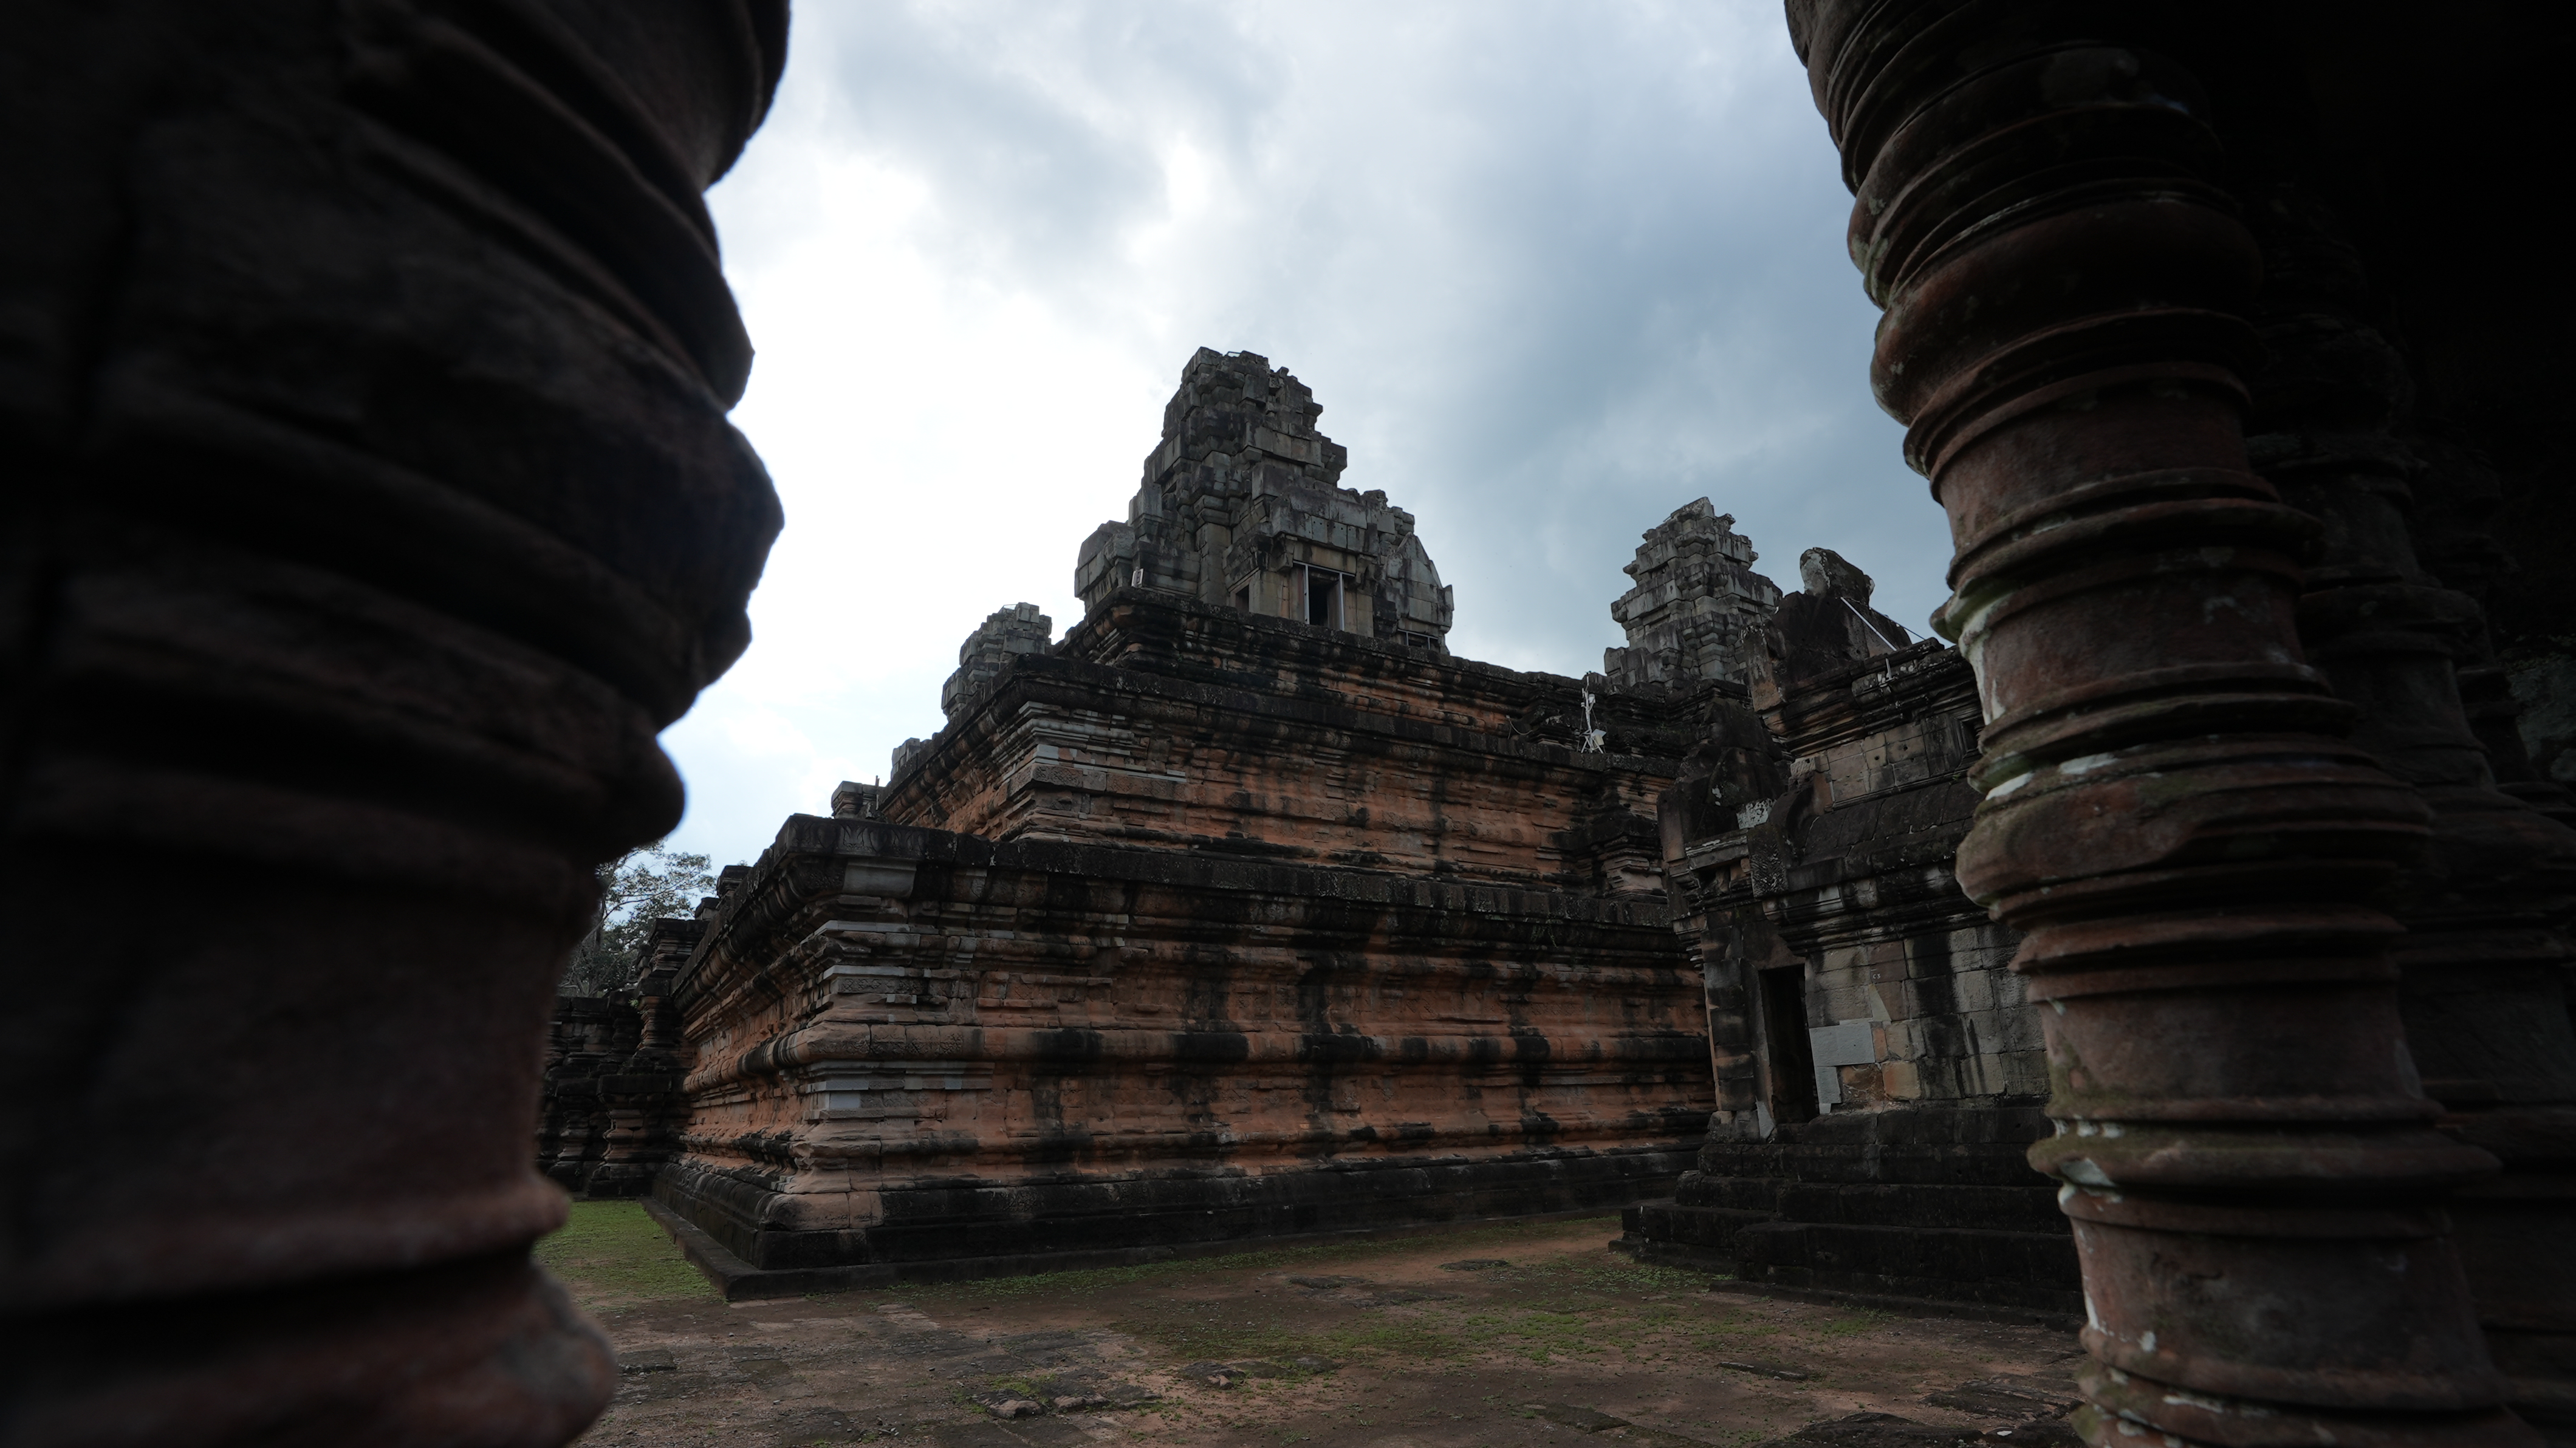 A view of the Ta Keo in the central zone of the Angkor Archaeological Park in Cambodia. /CGTN